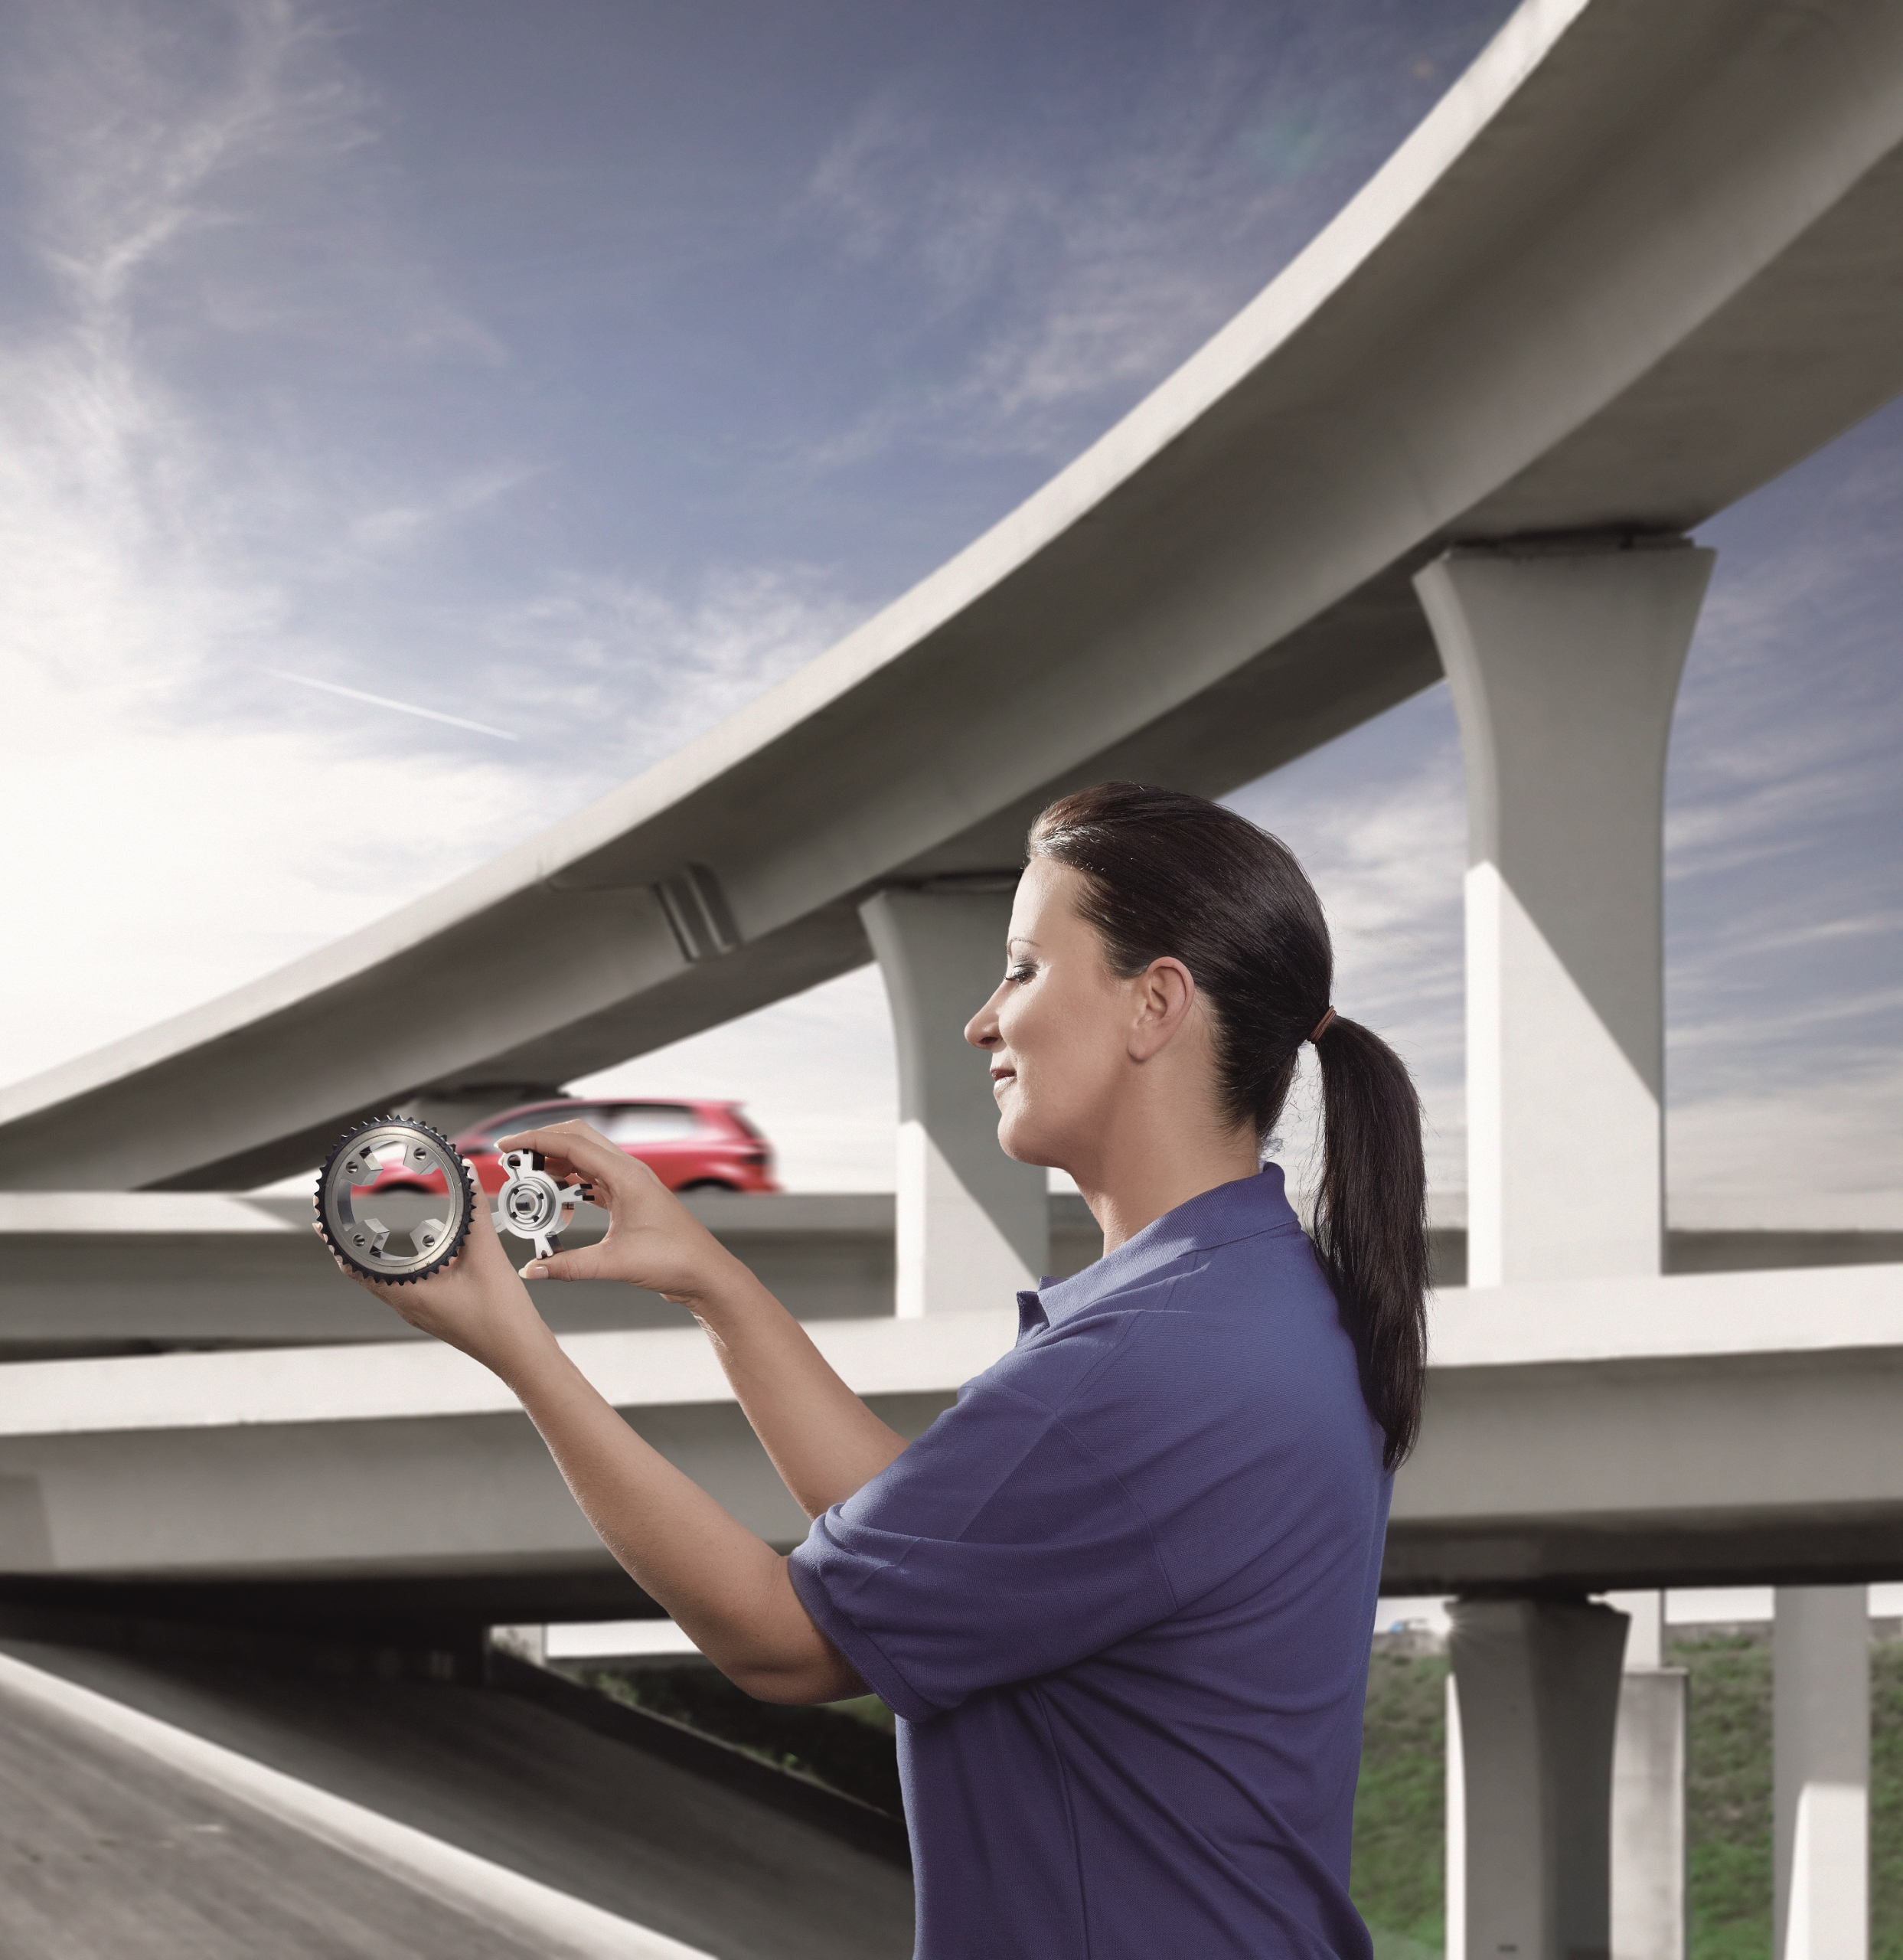 Woman holding automobile parts in front of highway overpass with passing car